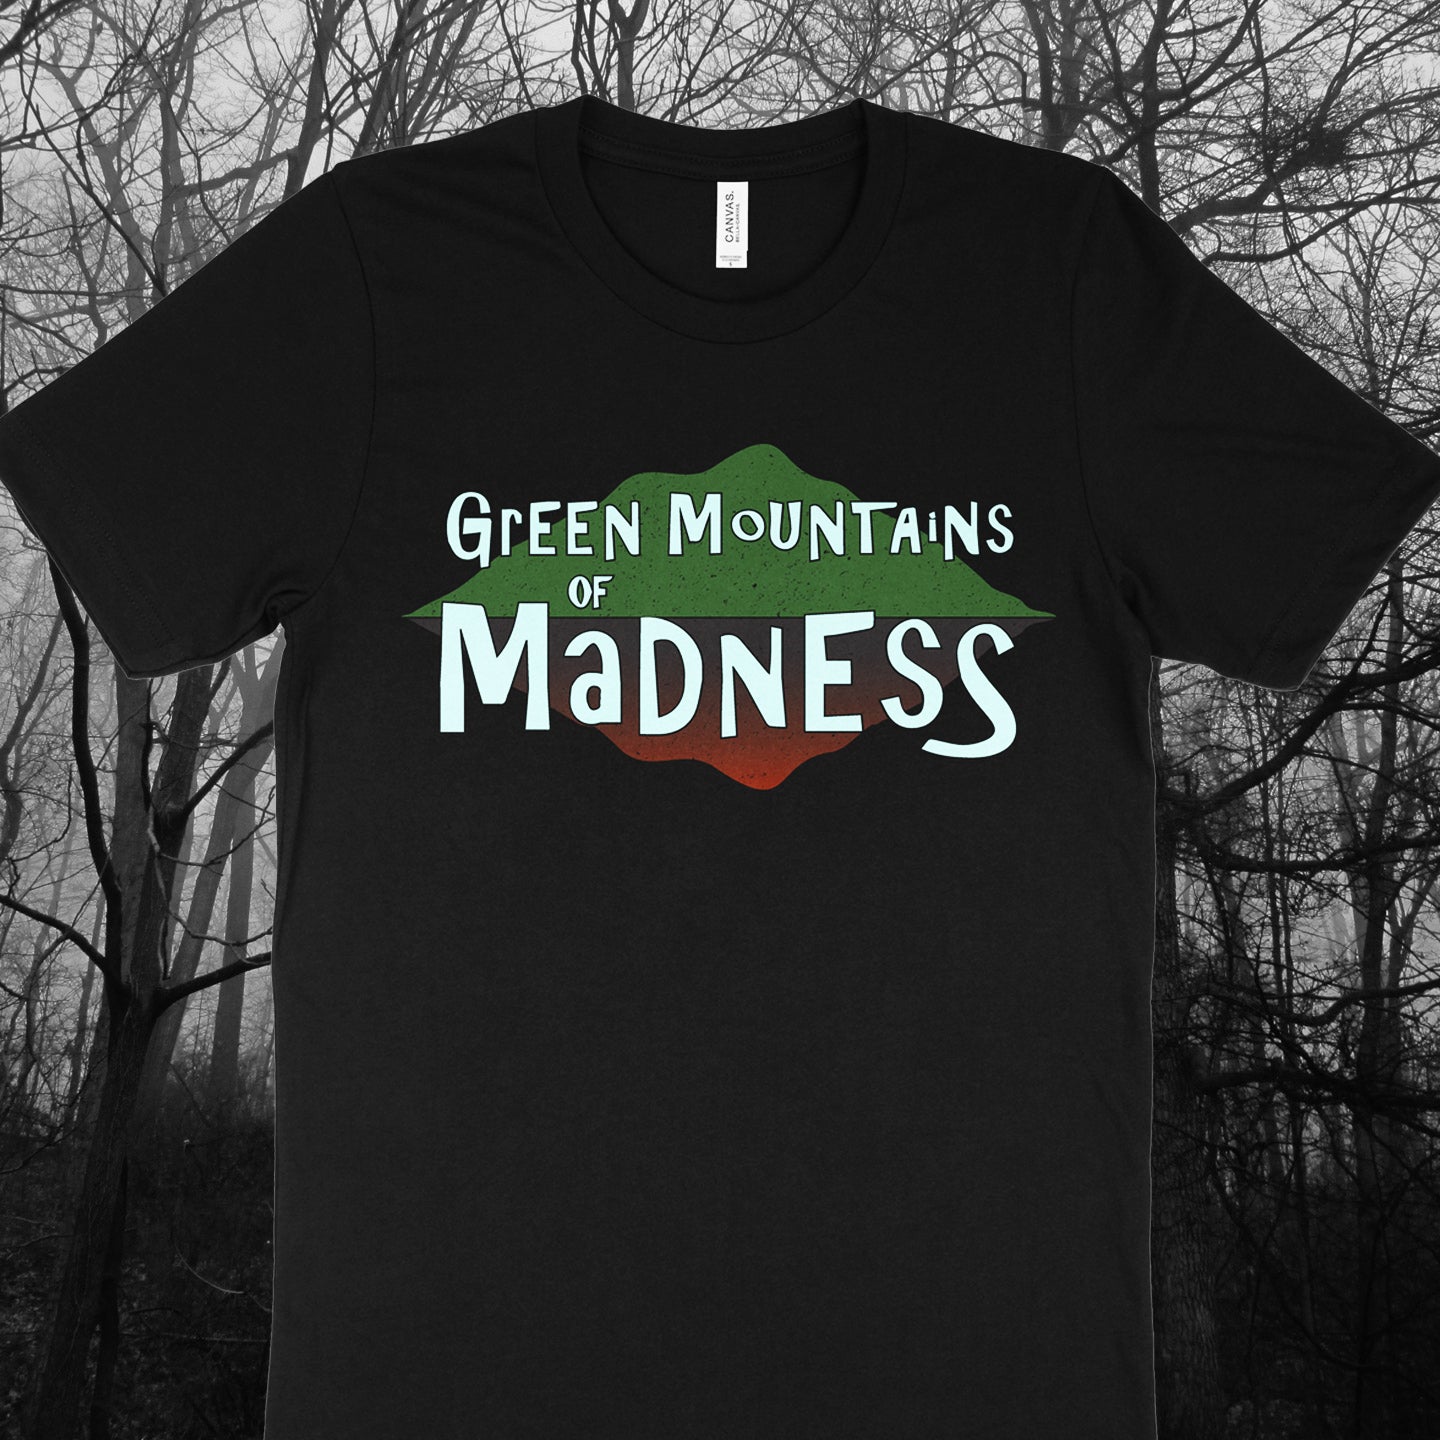 Green Mountains of Madness - Unisex Tee